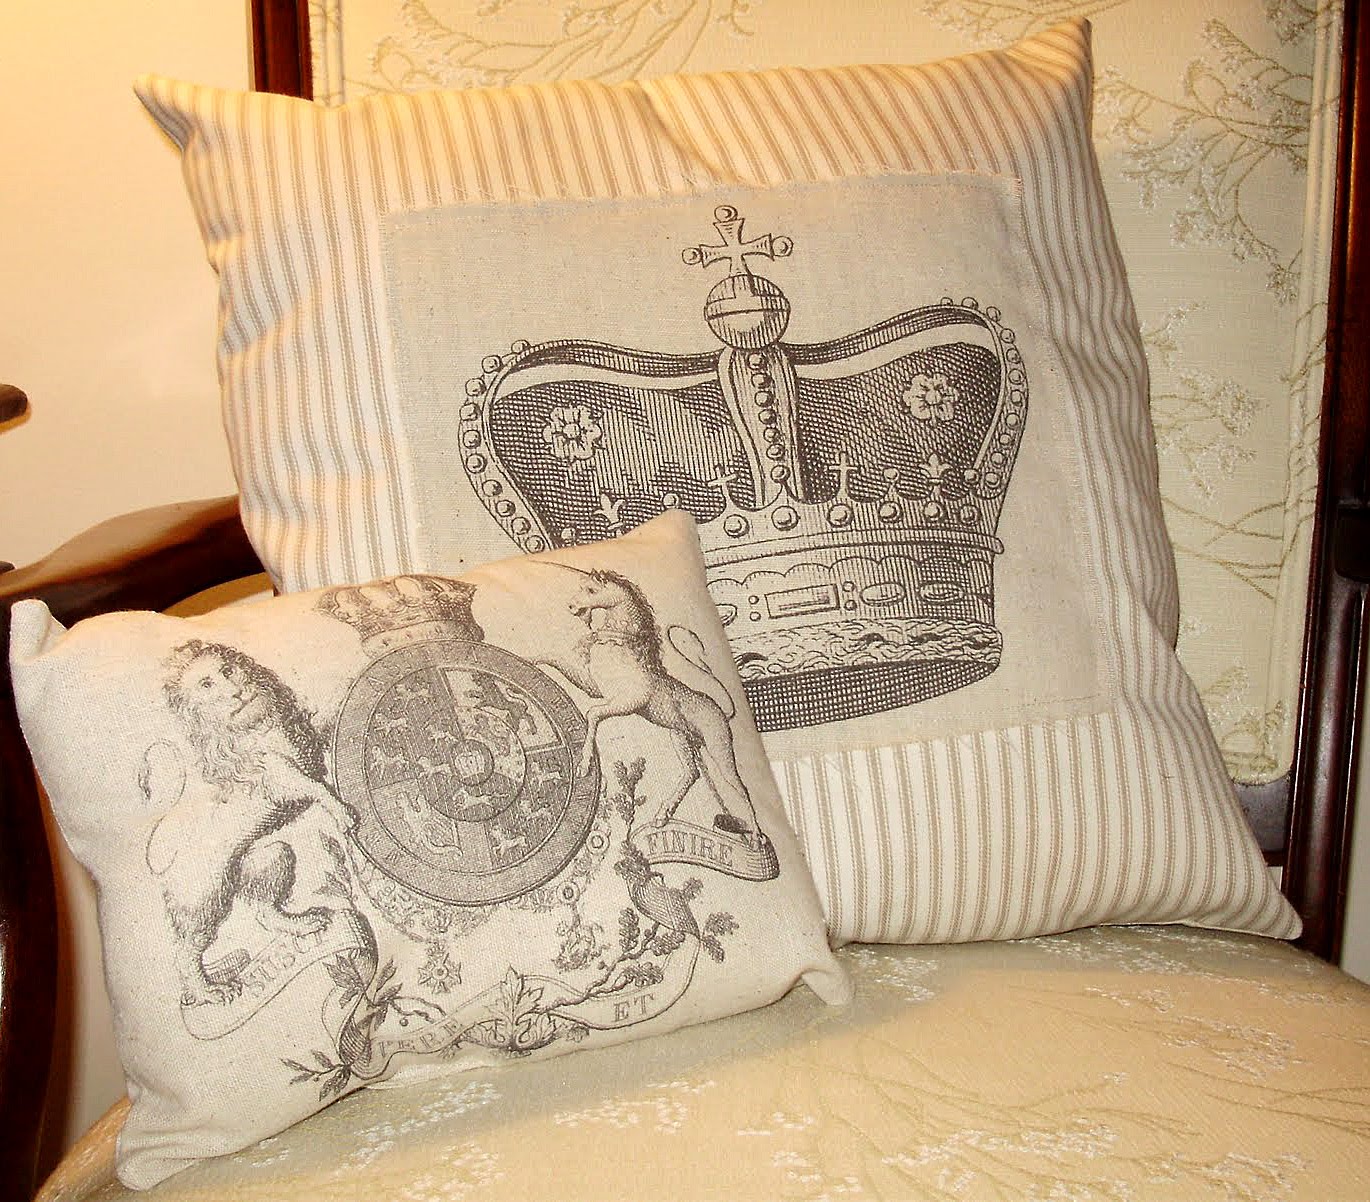 Regal Pillows - Printing on Fabric - The Graphics Fairy1370 x 1202